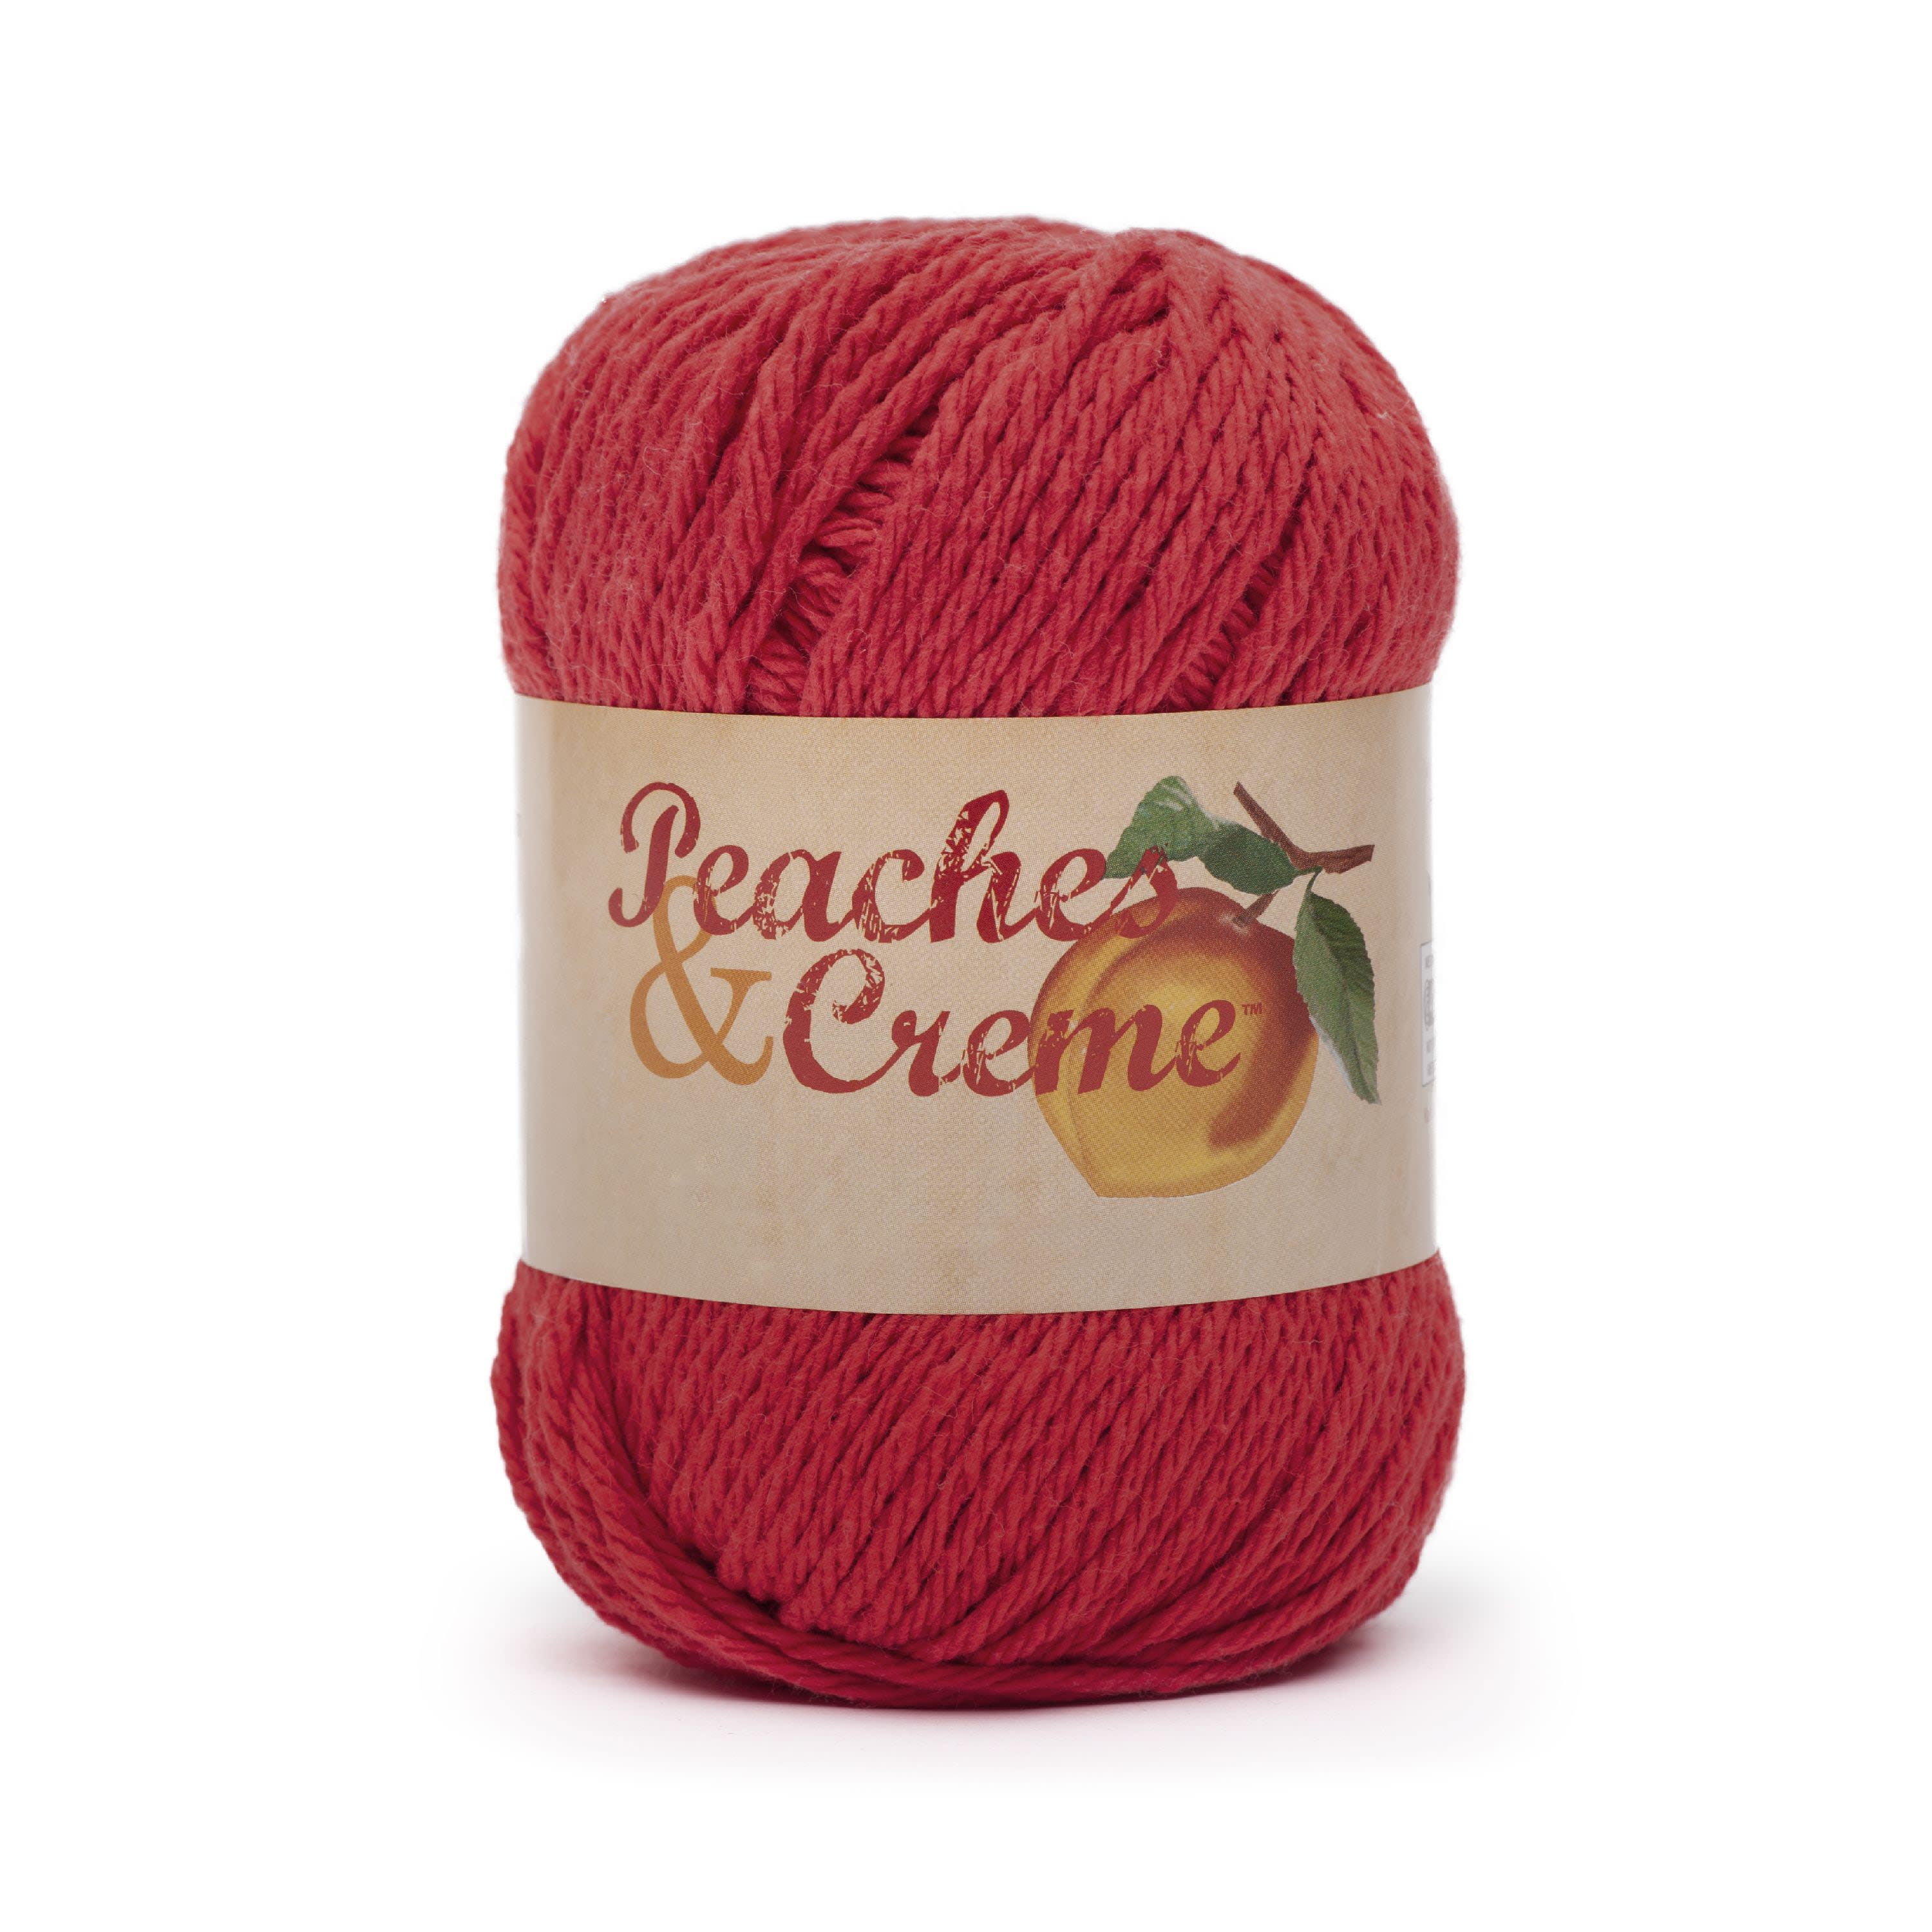 Peaches & Creme Solid 4 Medium Cotton Yarn, Black 2.5oz/70.9g, 120 Yards -  DroneUp Delivery